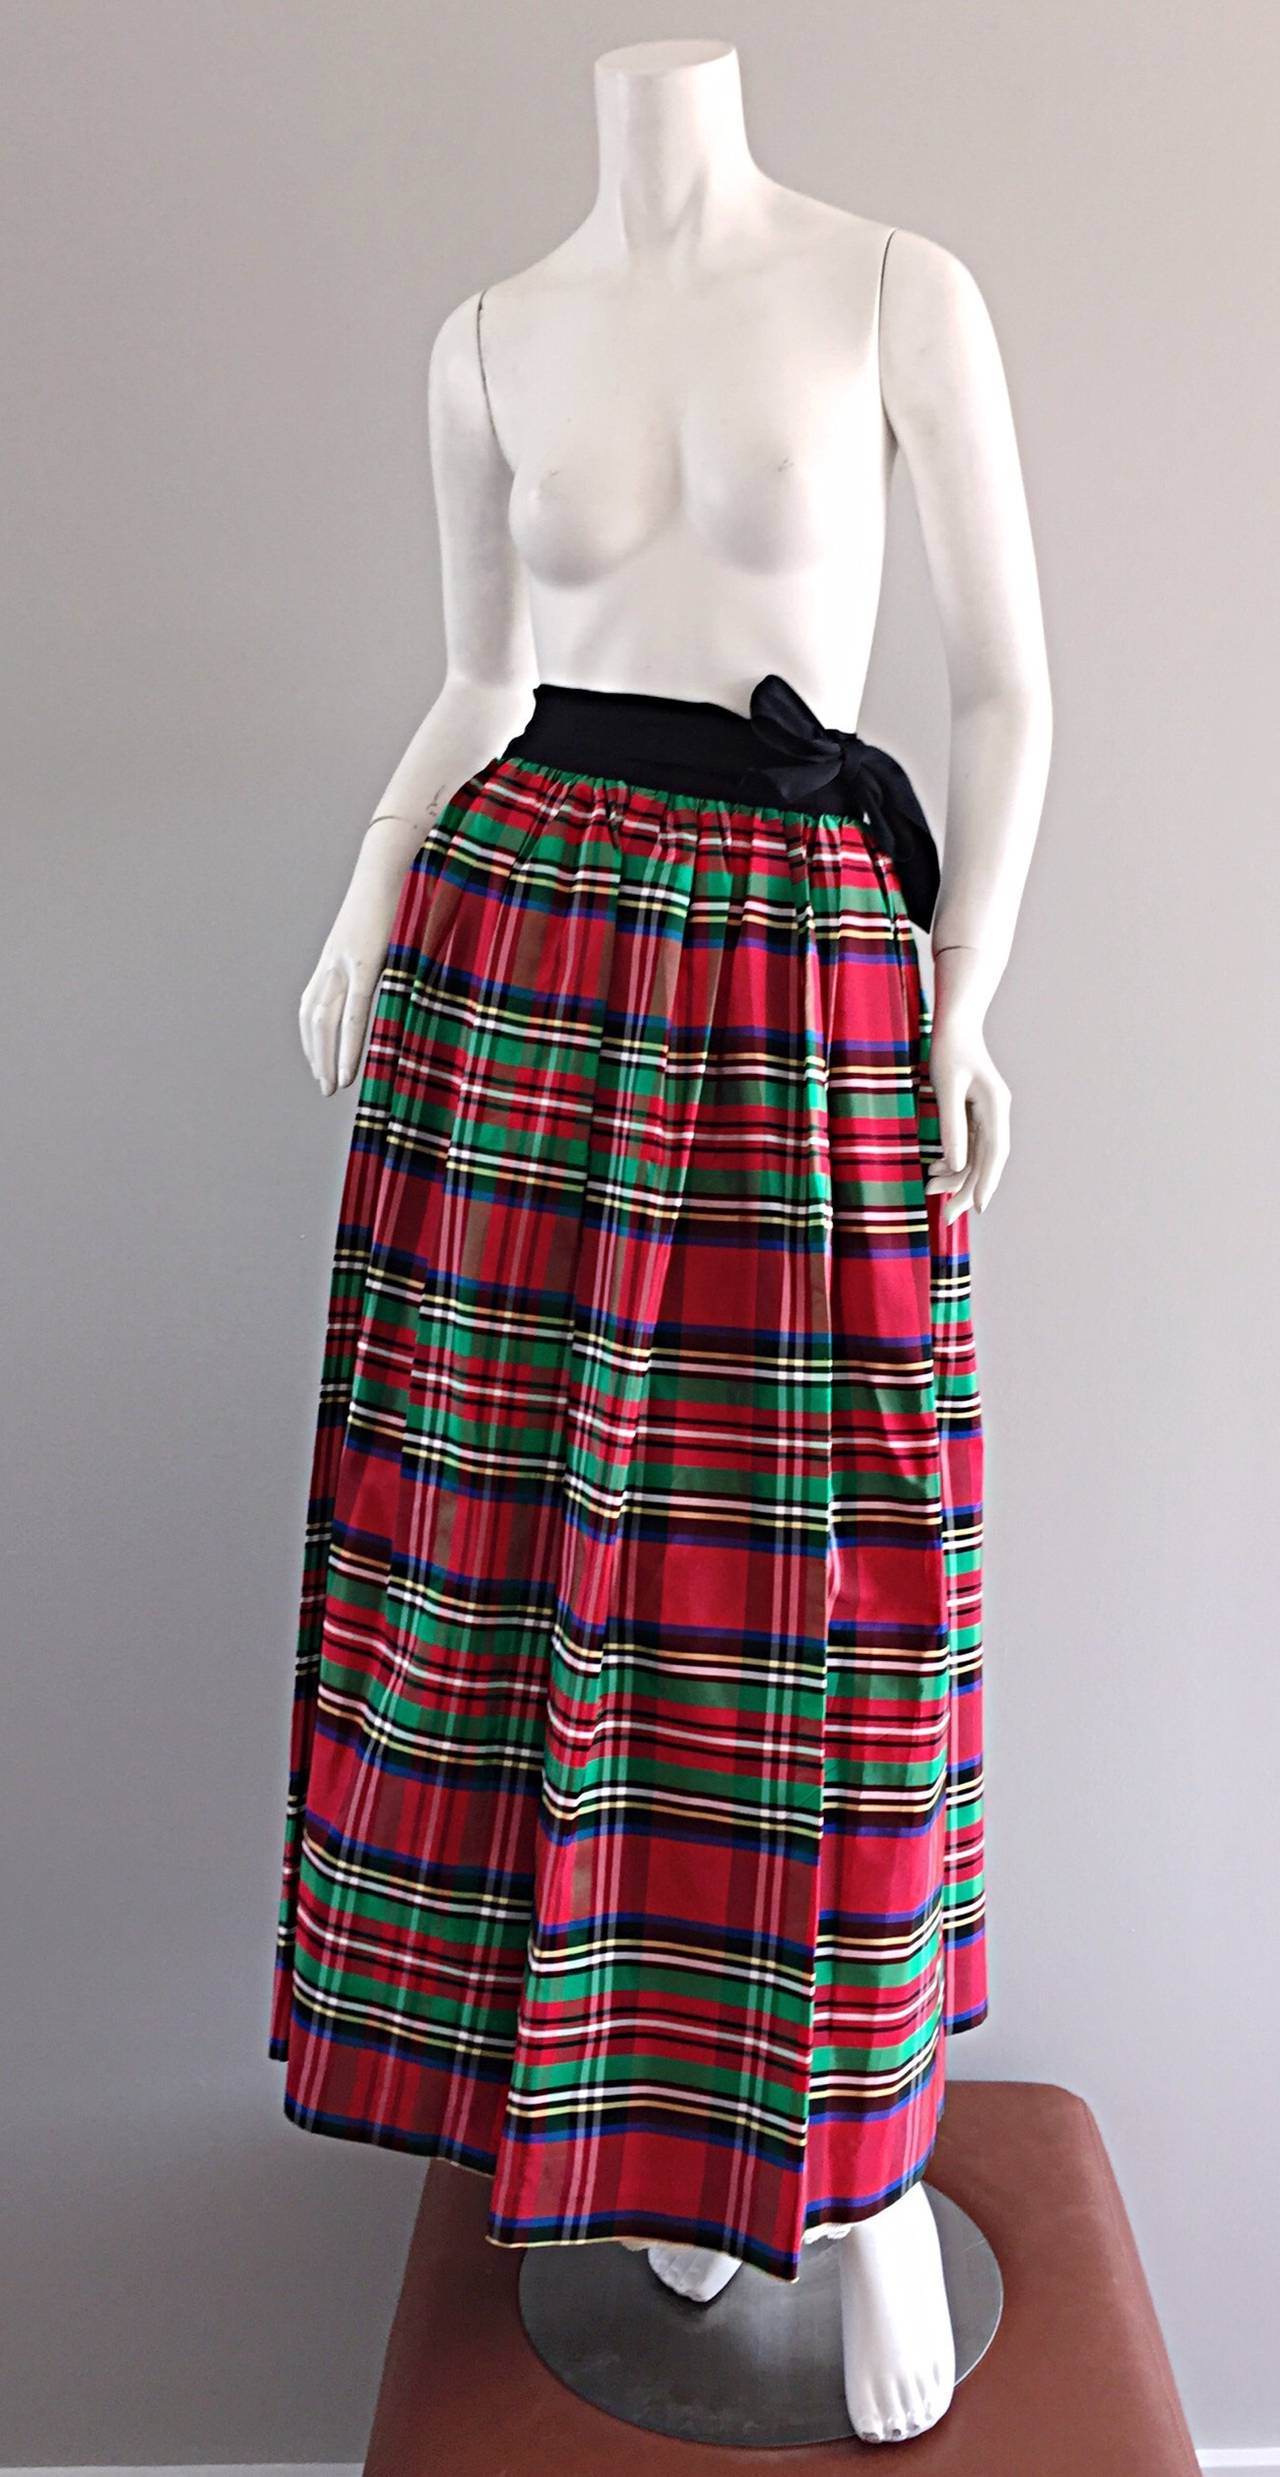 Beautiful, and very rare early Ellen Tracy for Bonwit Teller silk taffeta skirt! Vibrant tartan plaid print. Wrap style, that ties around the waist, to form a chic bow at the side. Wonderful contrasting polka dot lining, with attached lace on